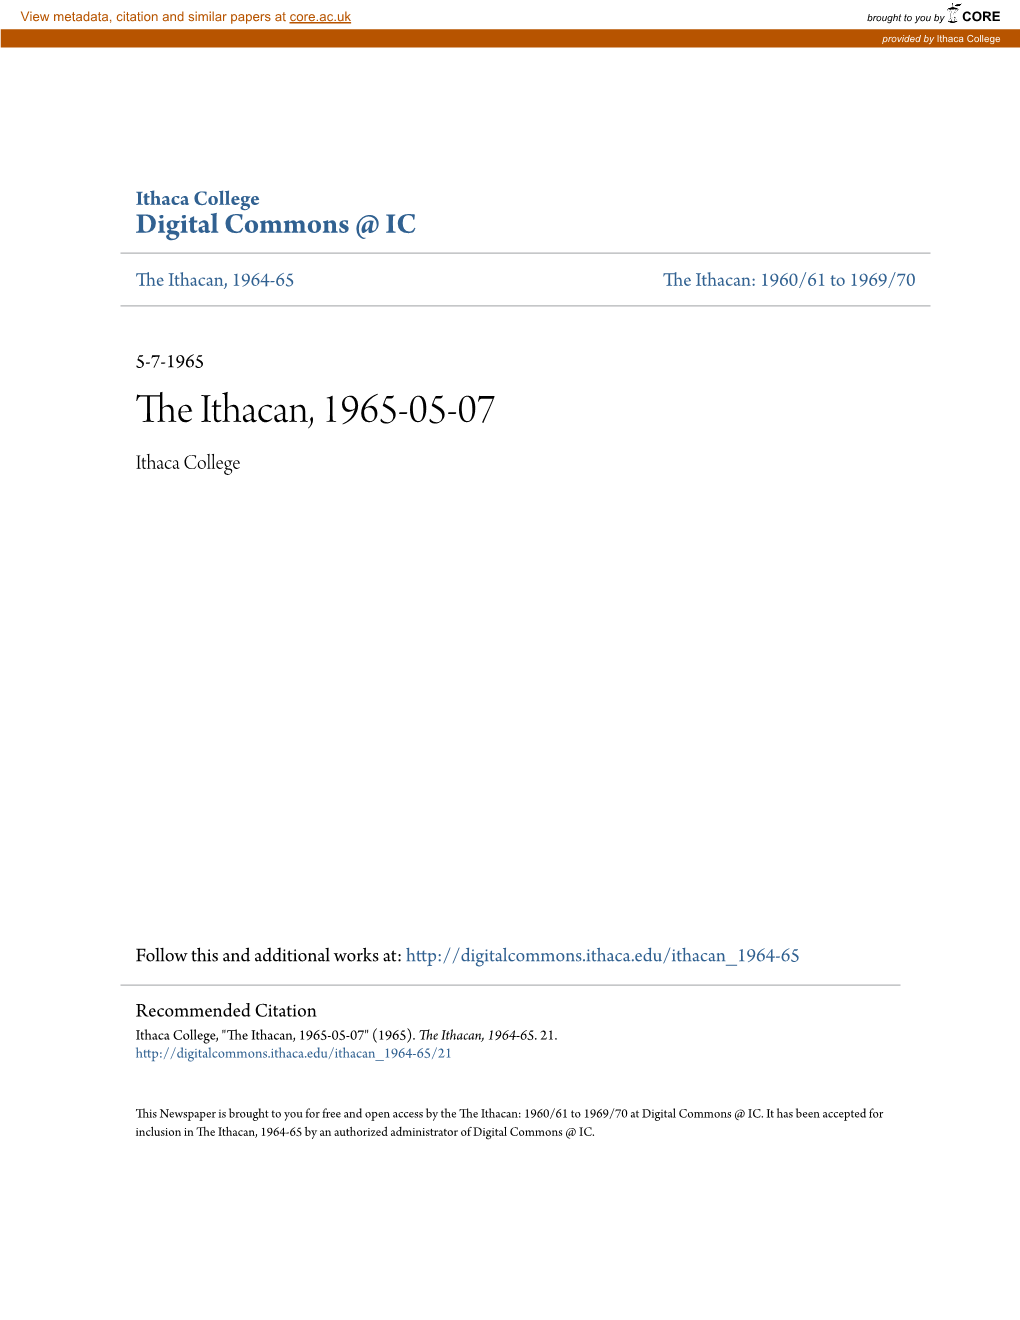 The Ithacan, 1965-05-07